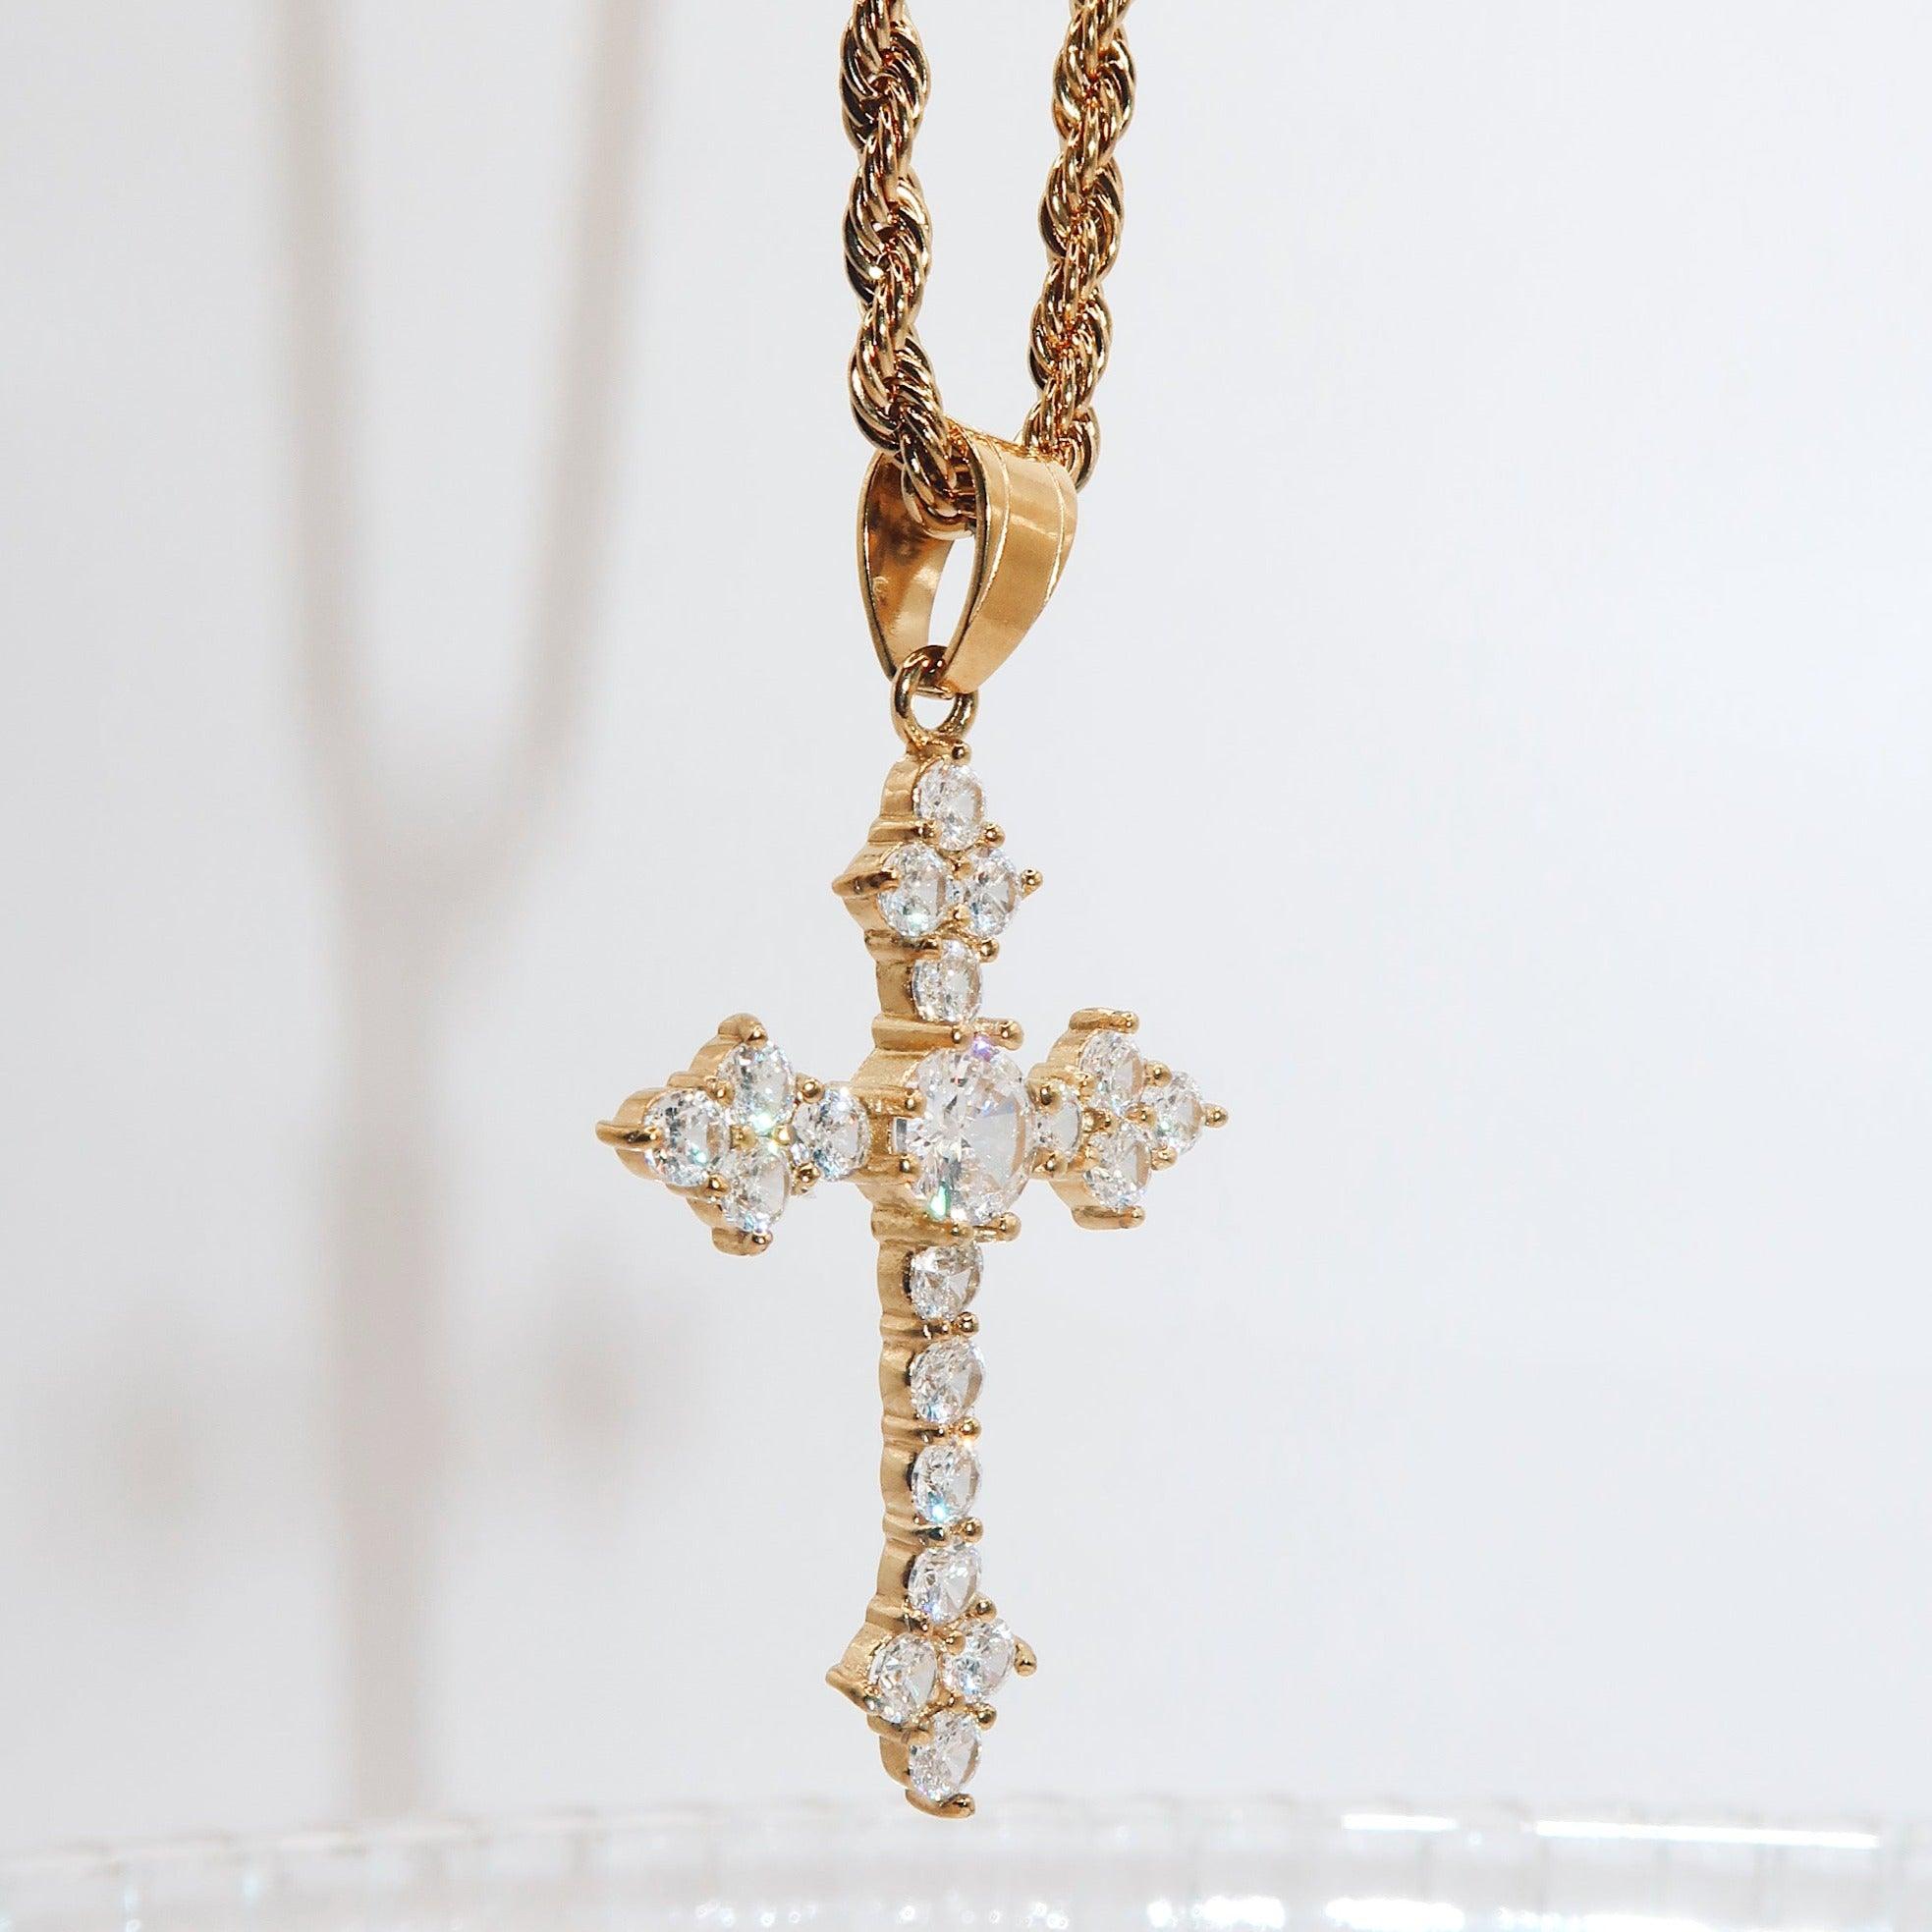 CANDACE - 18K PVD Gold Plated Cross Necklace with Round Brilliant Cut CZ Stones - Mixed Metals